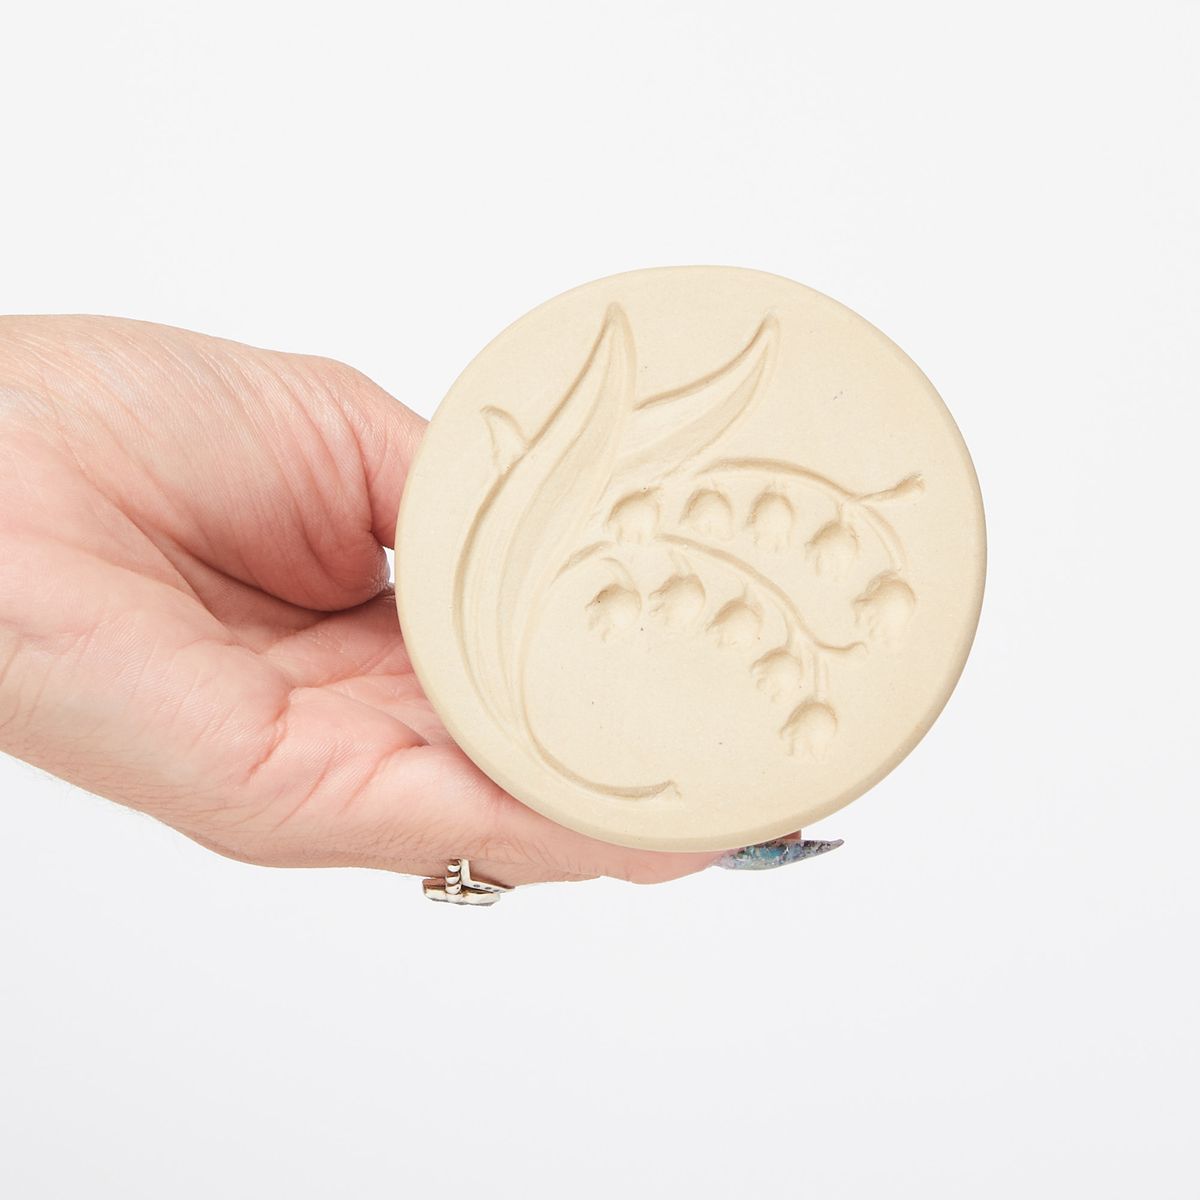 Hand holding a cookie stamp showing the bottom featuring the design of a lily of the valley